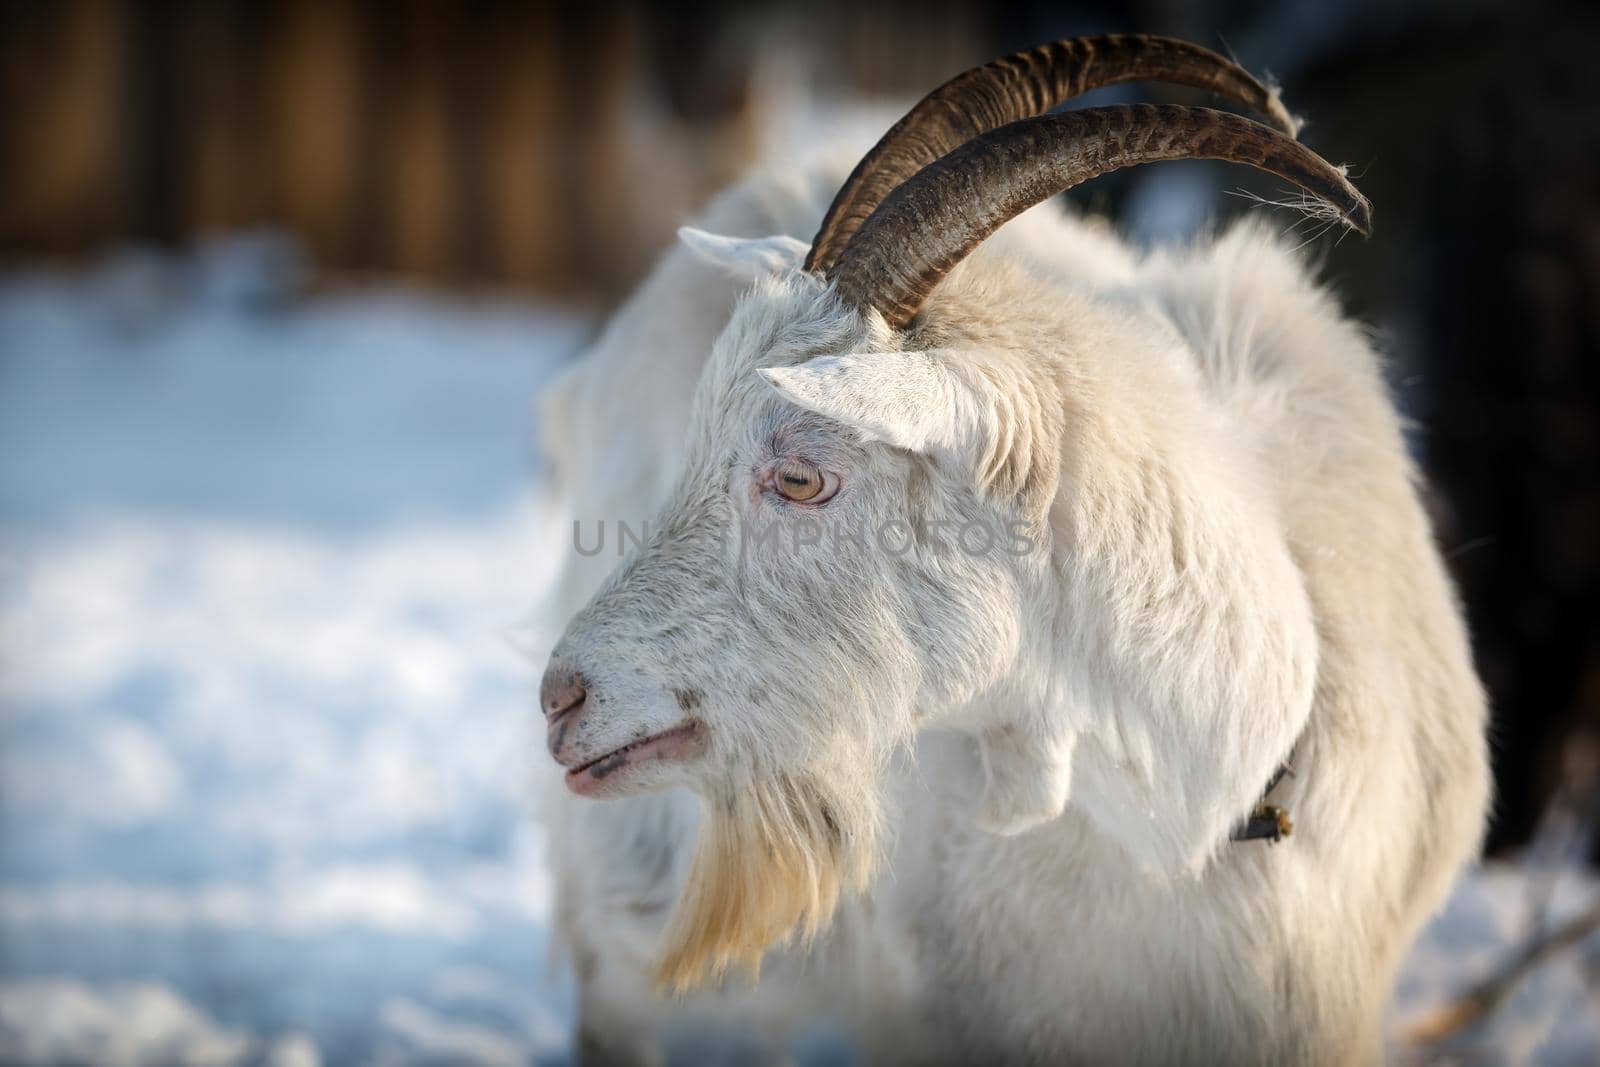 Goat with long horns enjoy the white winter by Lincikas